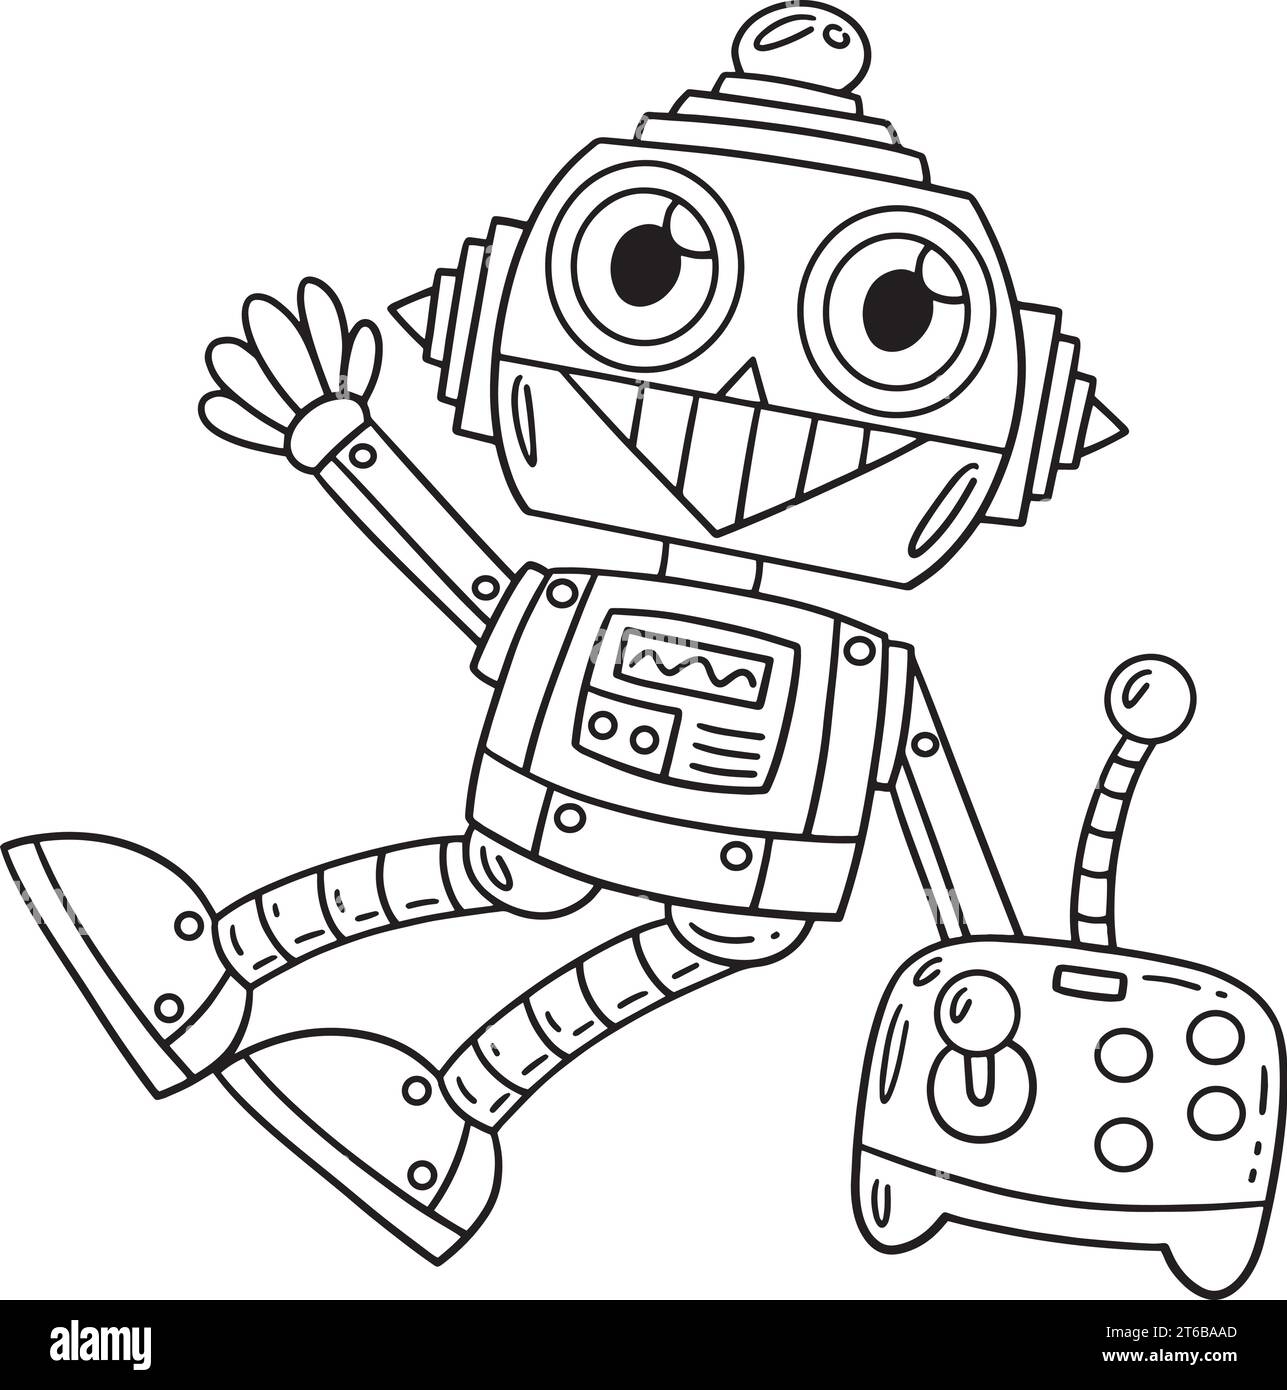 Robot and Remote Control Isolated Coloring Page Stock Vector